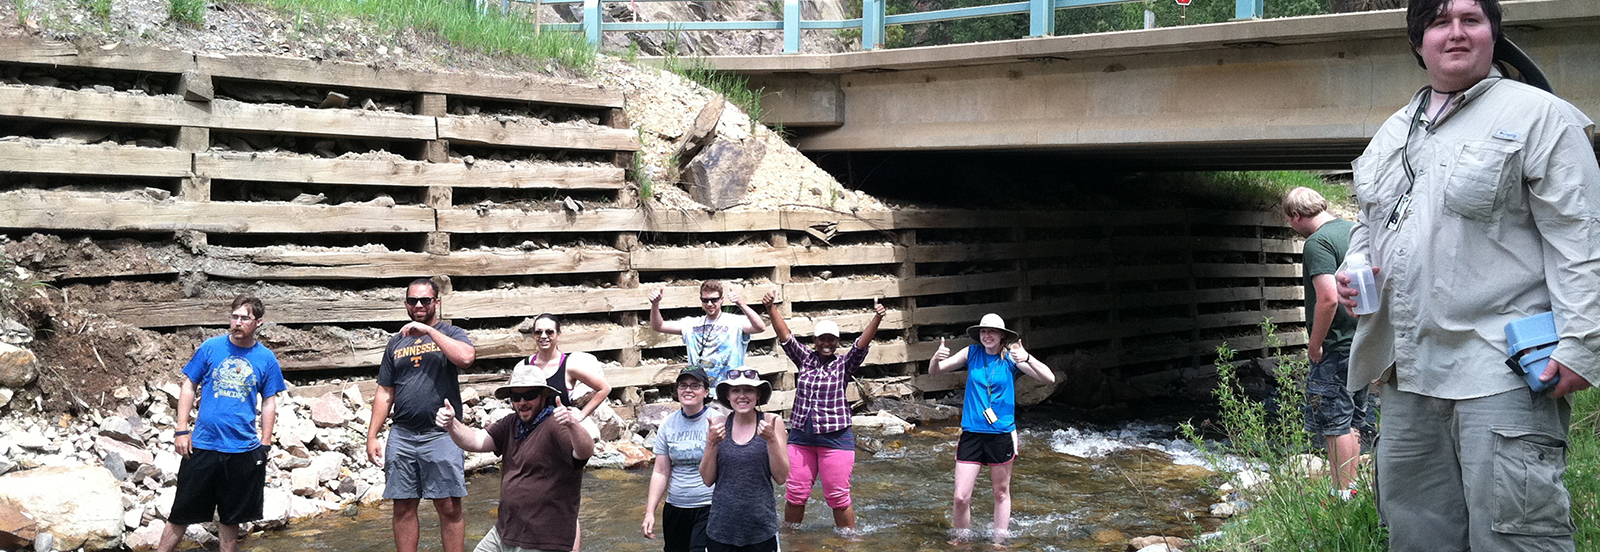 ESCI 4622, Geology Field Camp, students measuring stream discharge and cooling off at Lead, South Dakota.